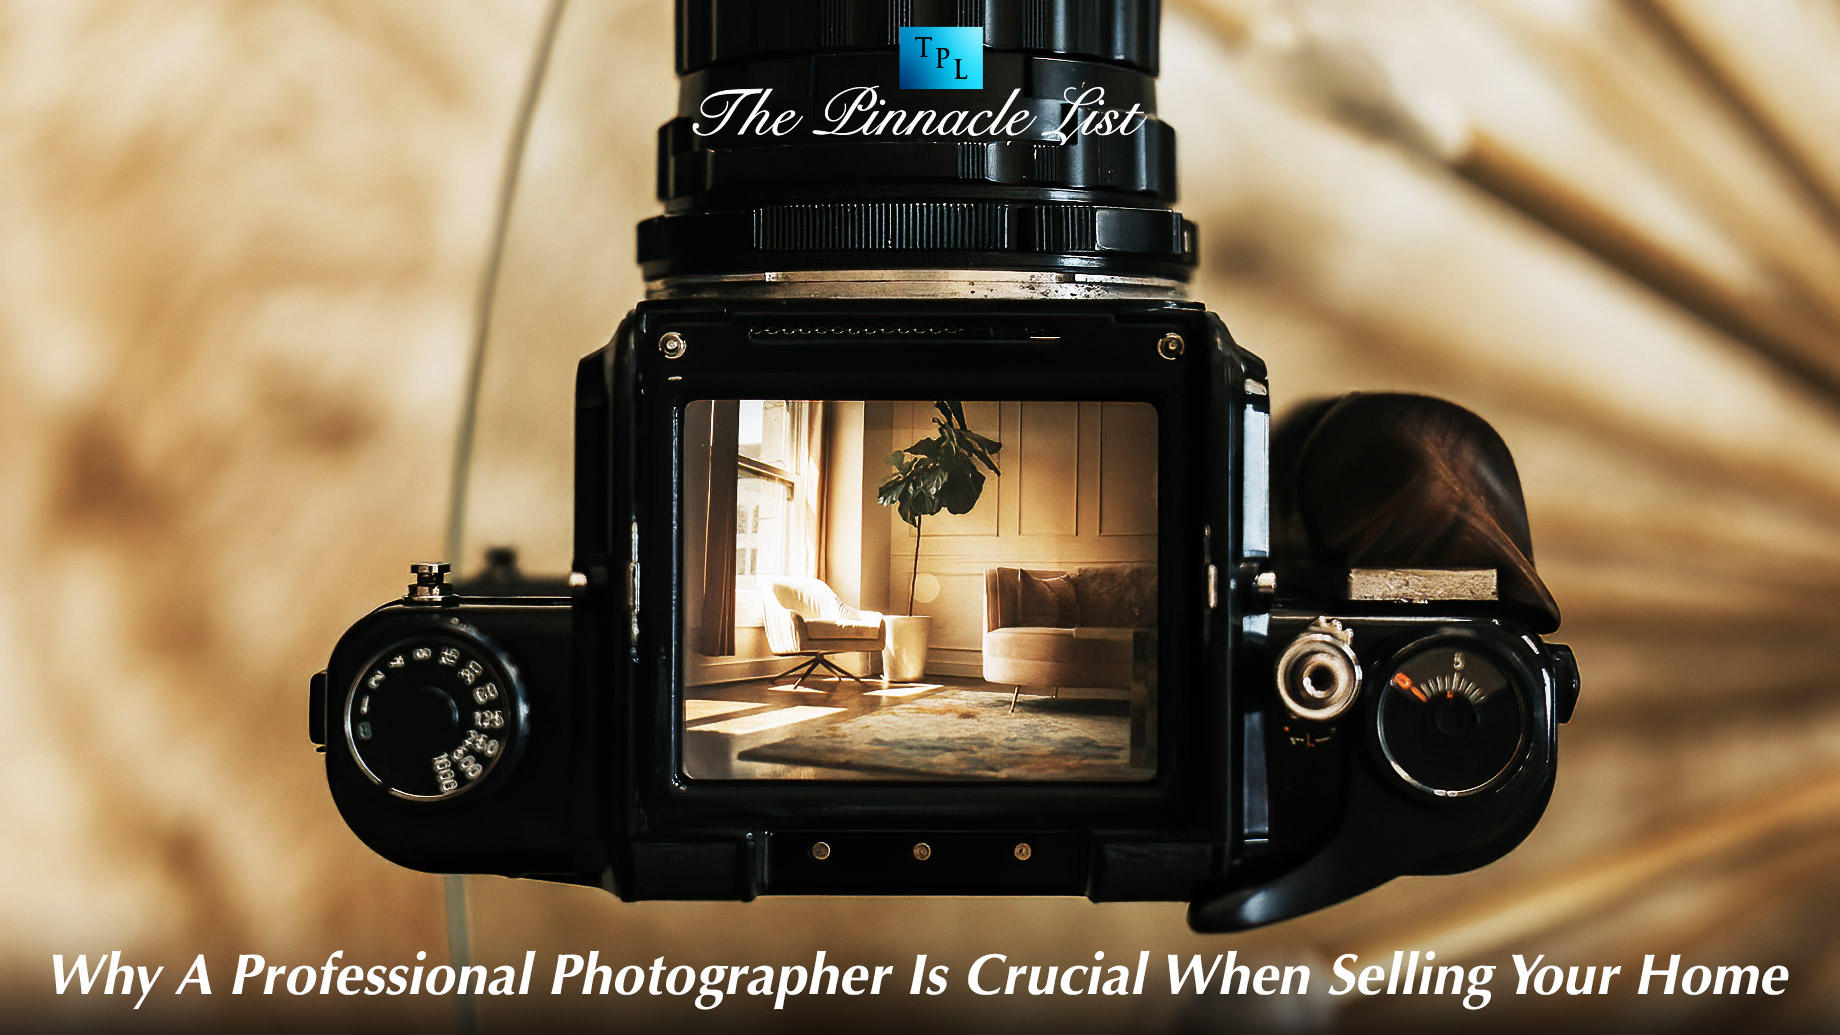 Why A Professional Photographer Is Crucial When Selling Your Home